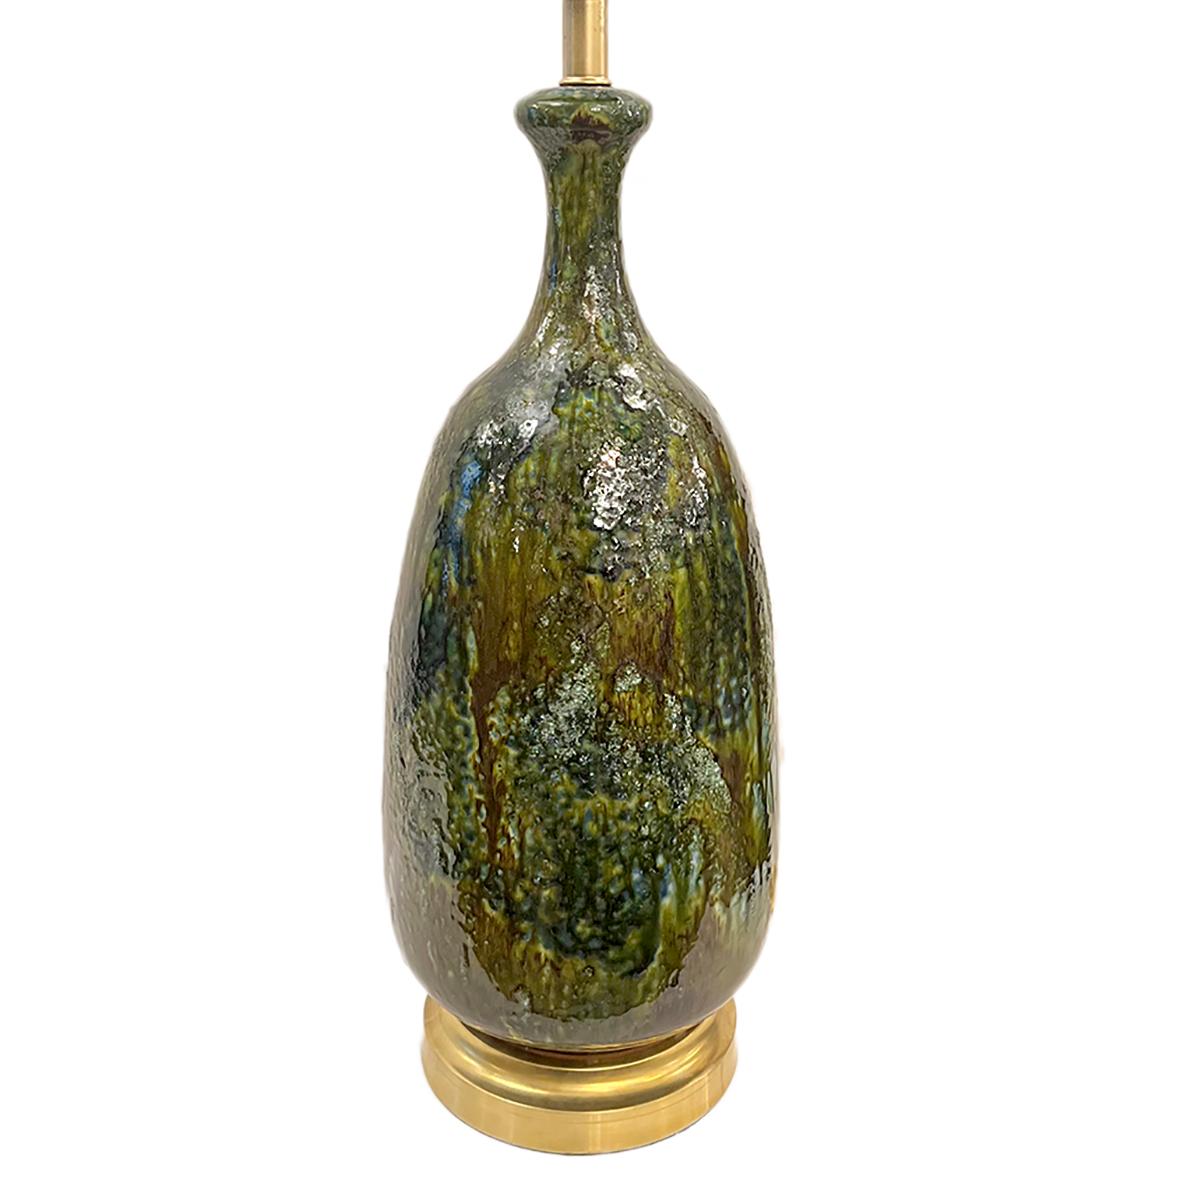 A circa 1960's Italian ceramic table lamp with gilt base.

Measurements:
Height of body: 23.25